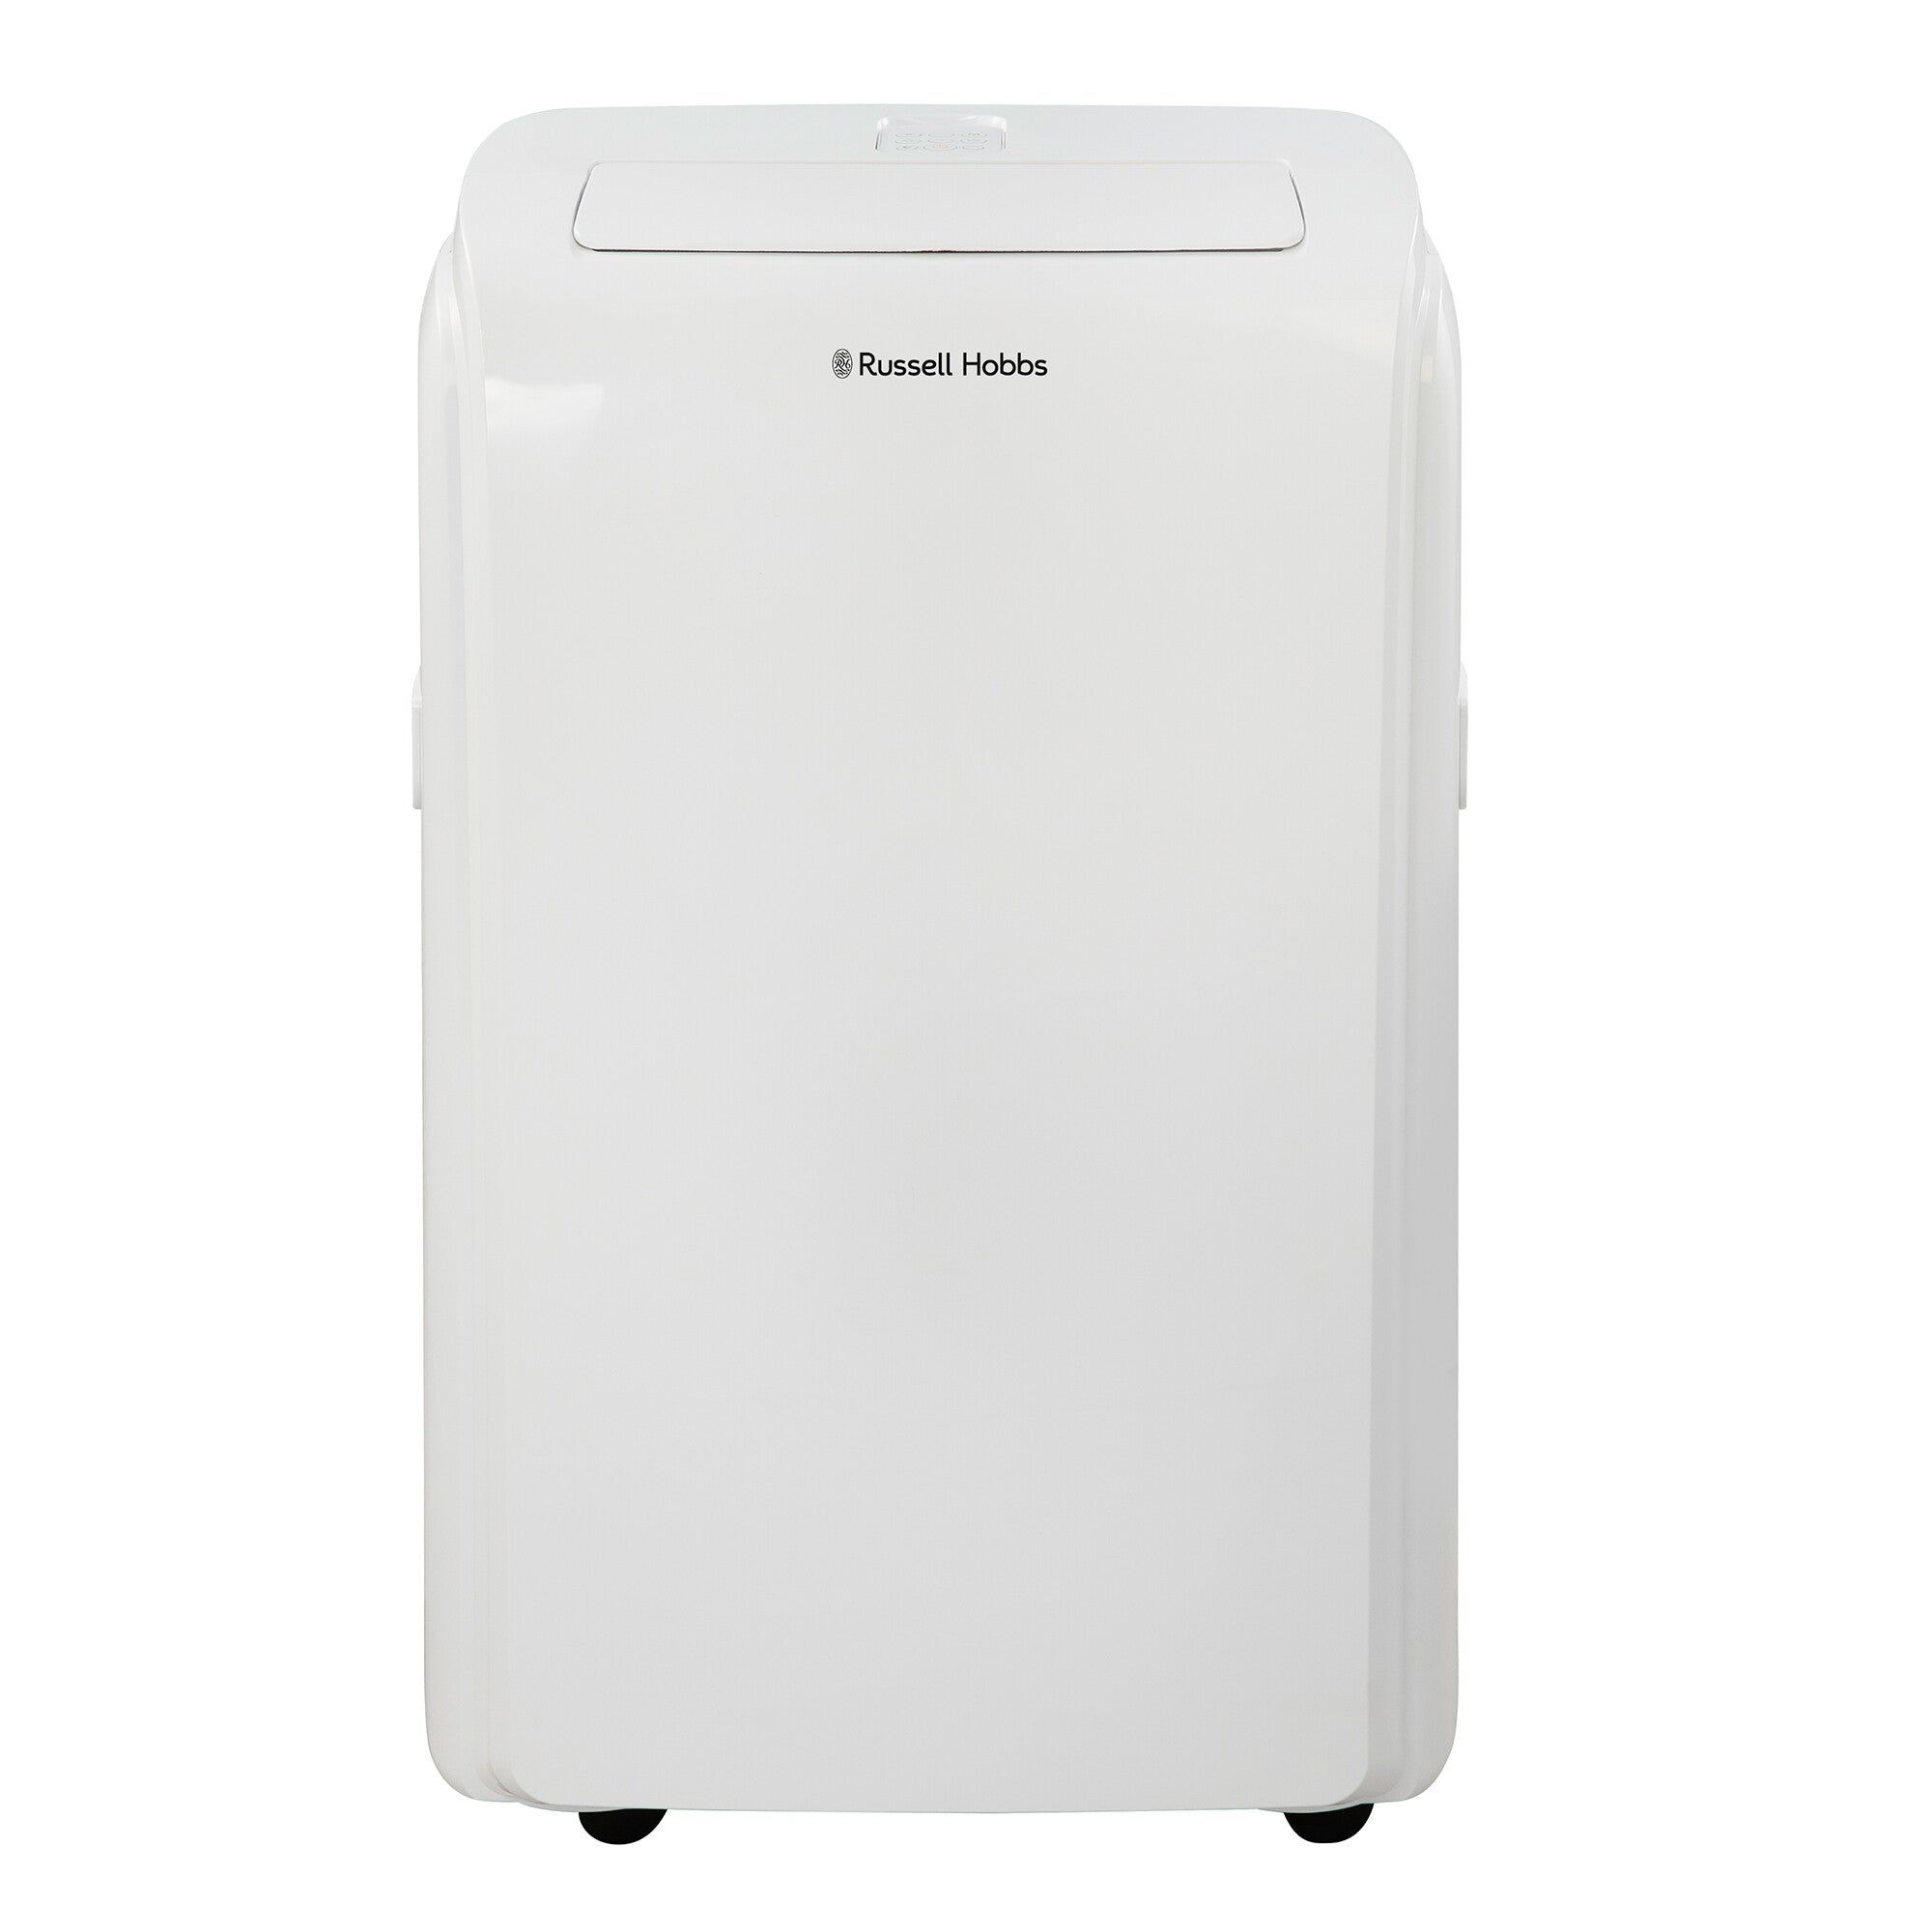 RUSSELL HOBBS RHPAC11001 Air Conditioner